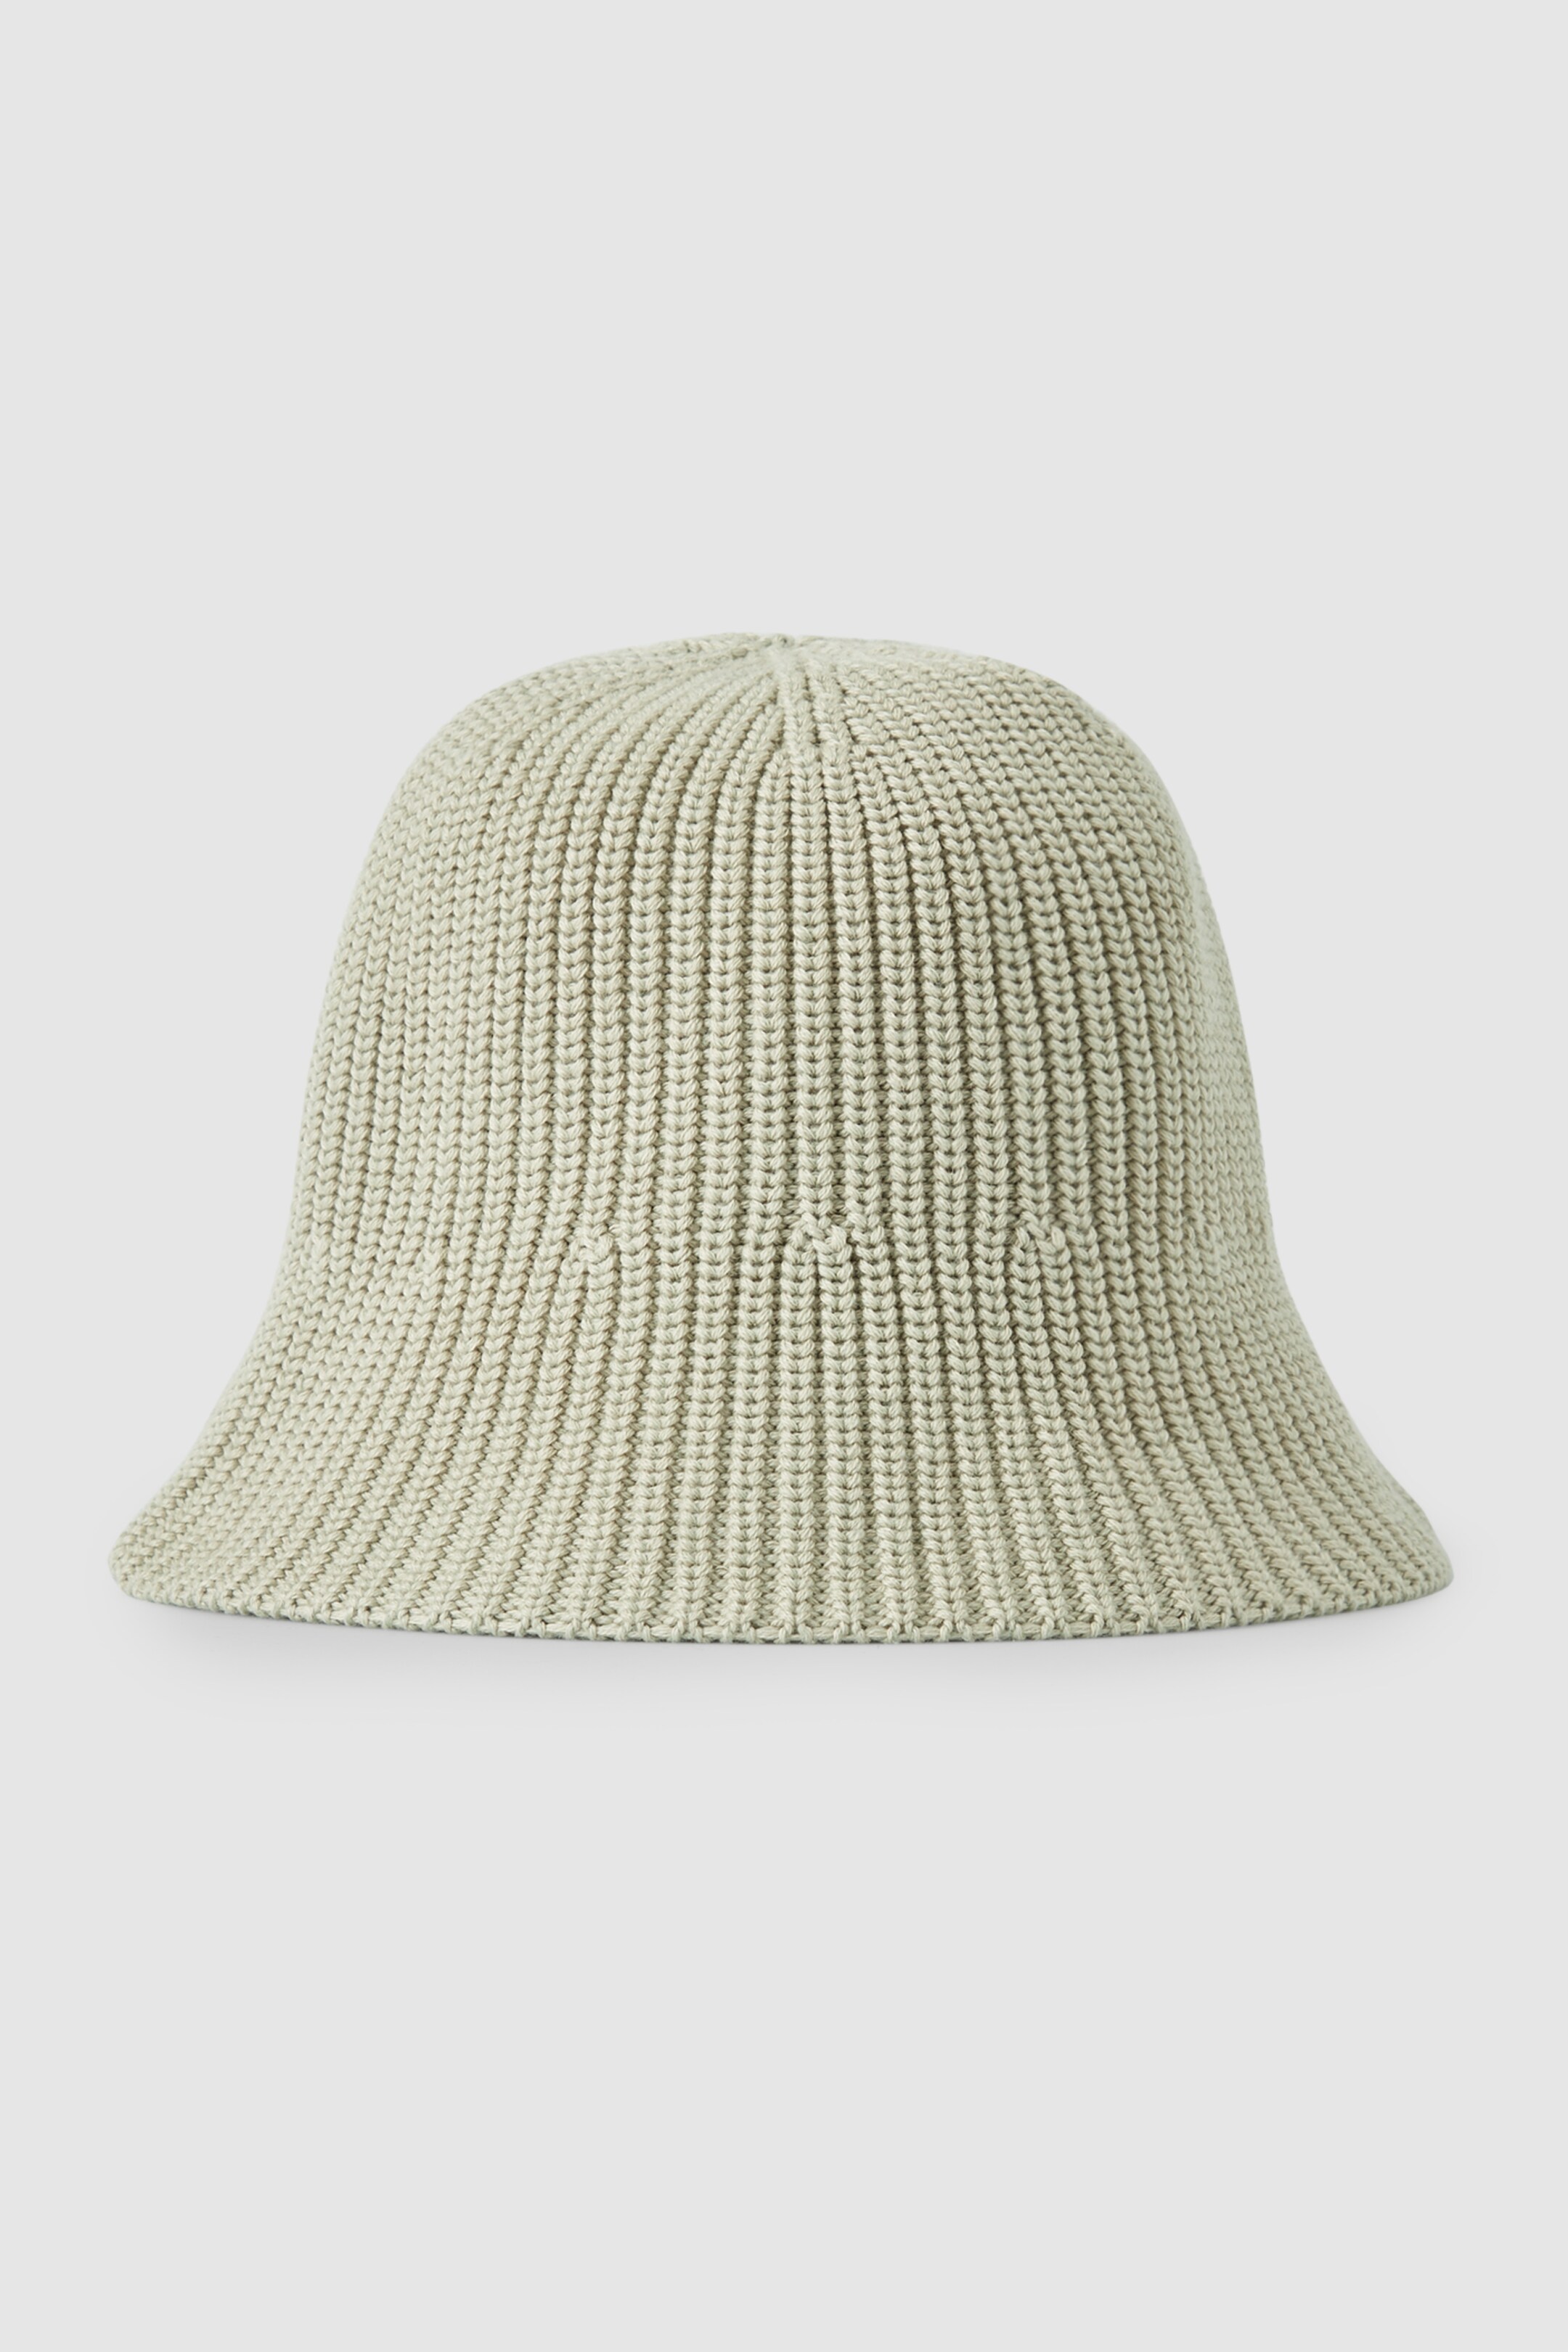 cos.com | Knitted bucket hat